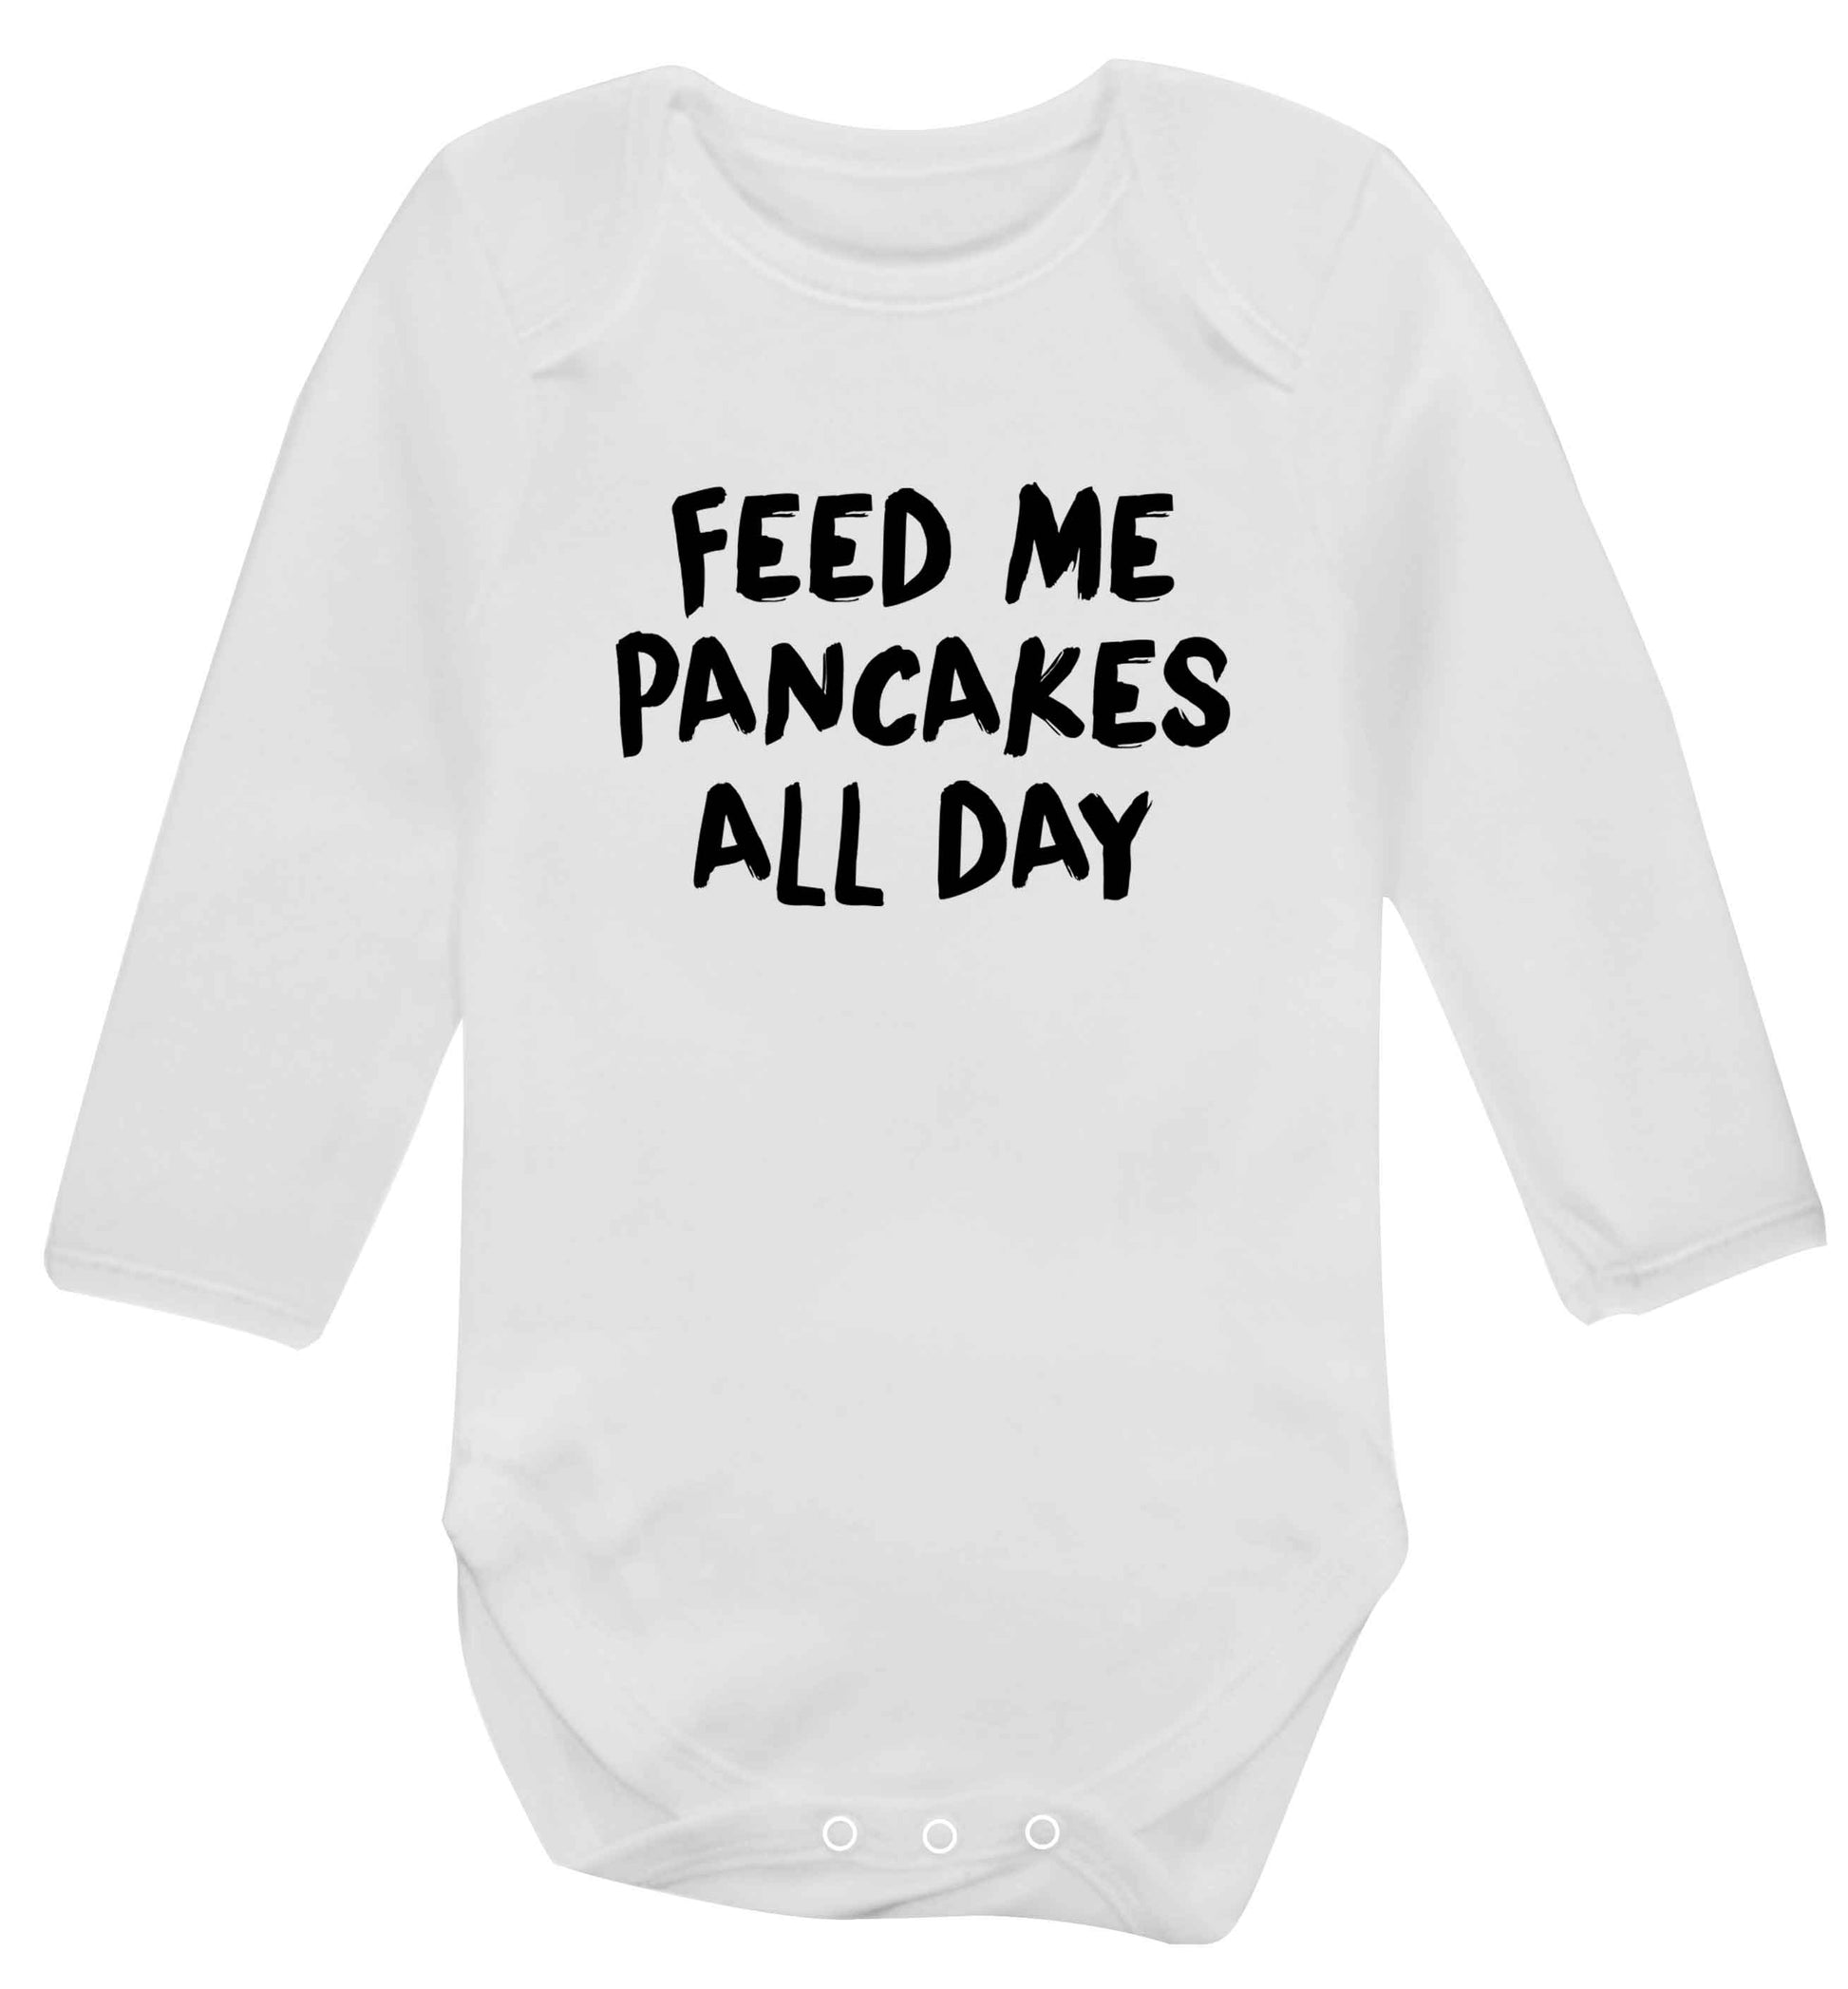 Feed me pancakes all day baby vest long sleeved white 6-12 months